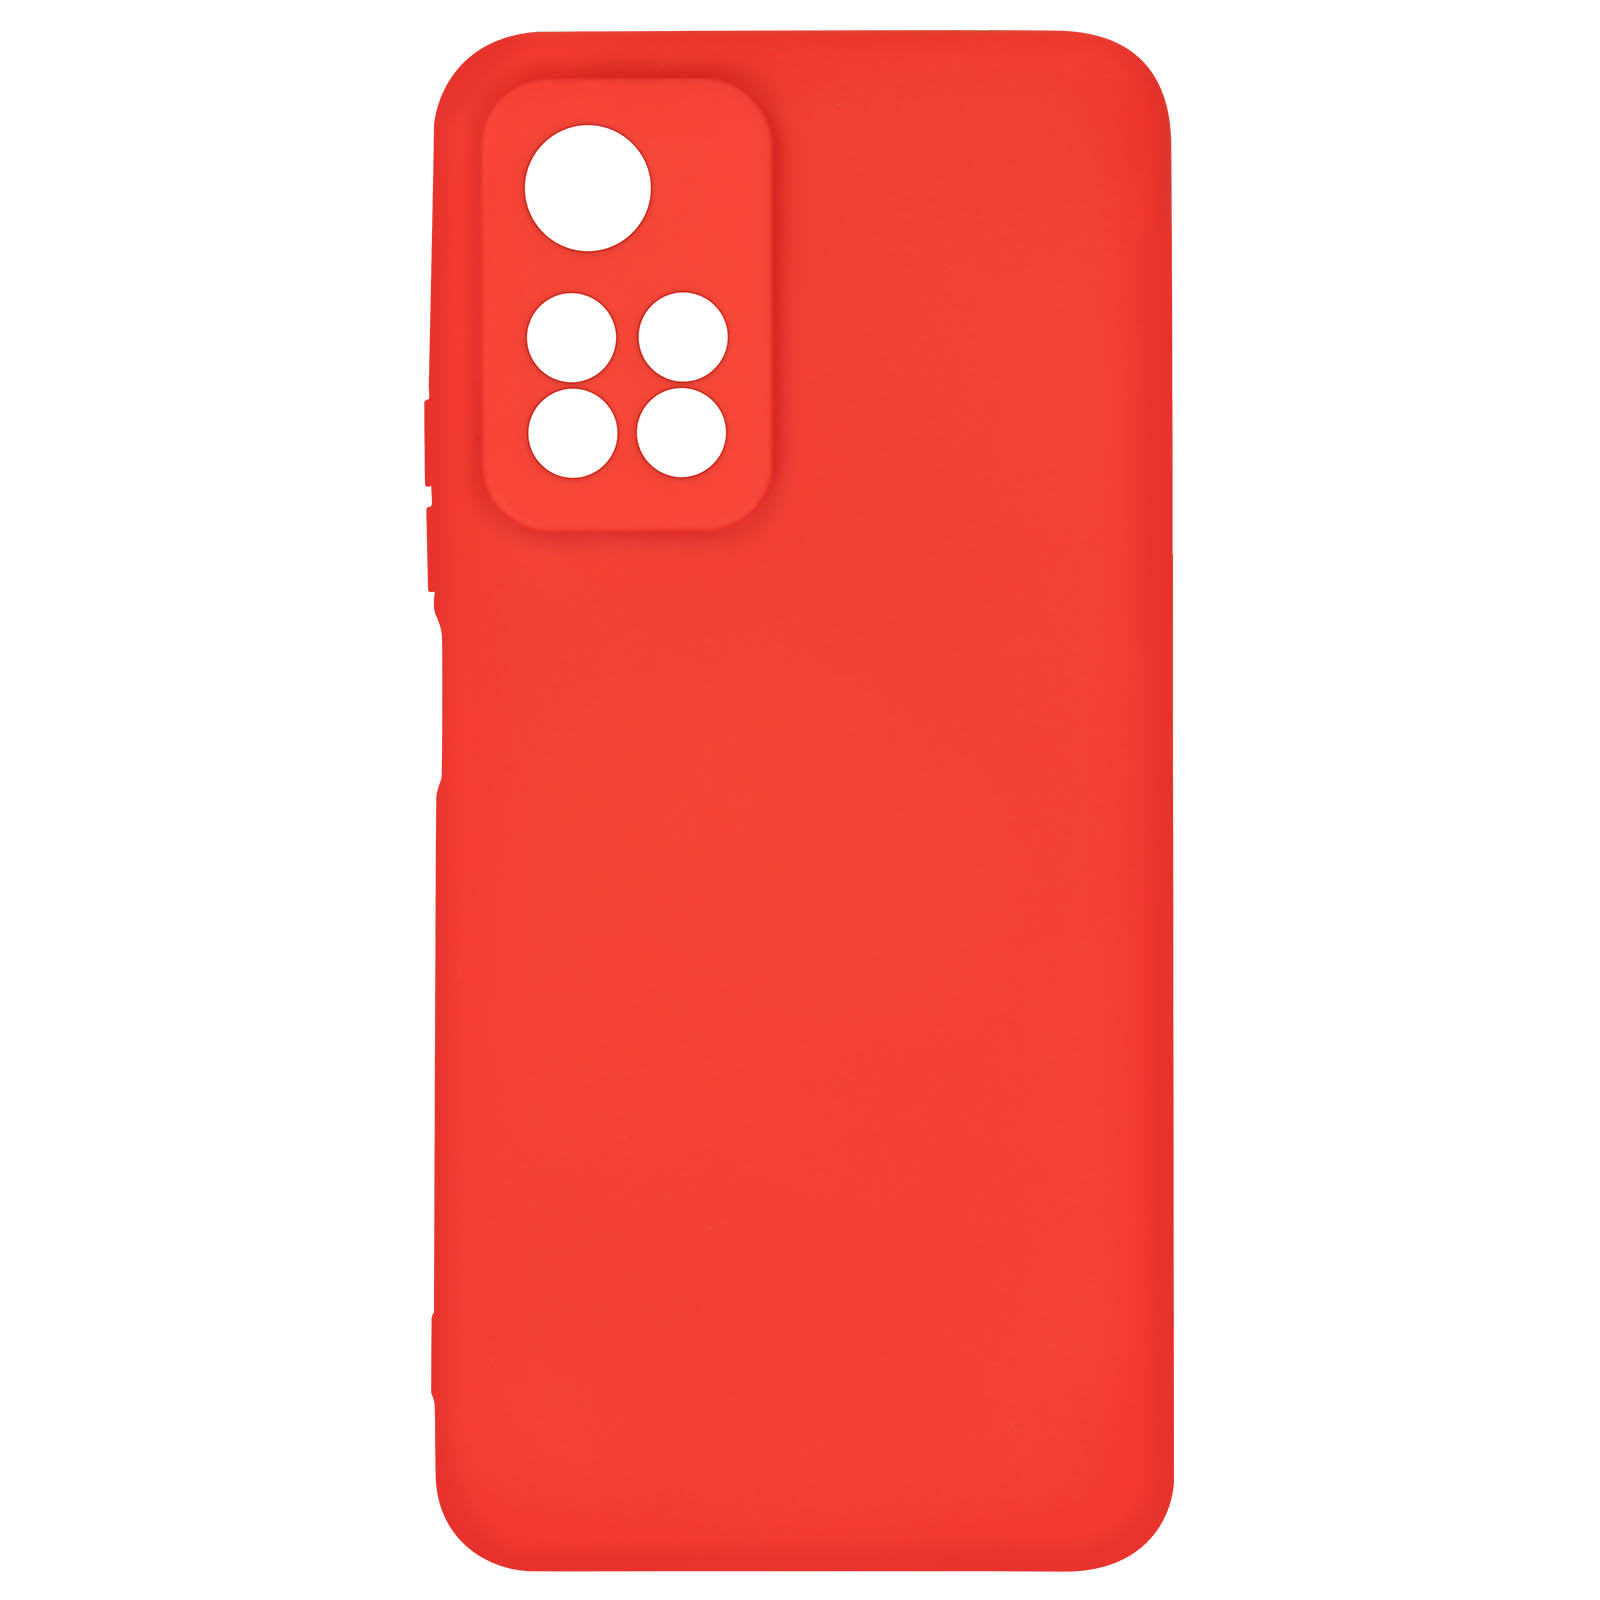 AVIZAR Soft Note Plus, Xiaomi, Touch Series, 11 Rot Handyhülle Backcover, Redmi Pro